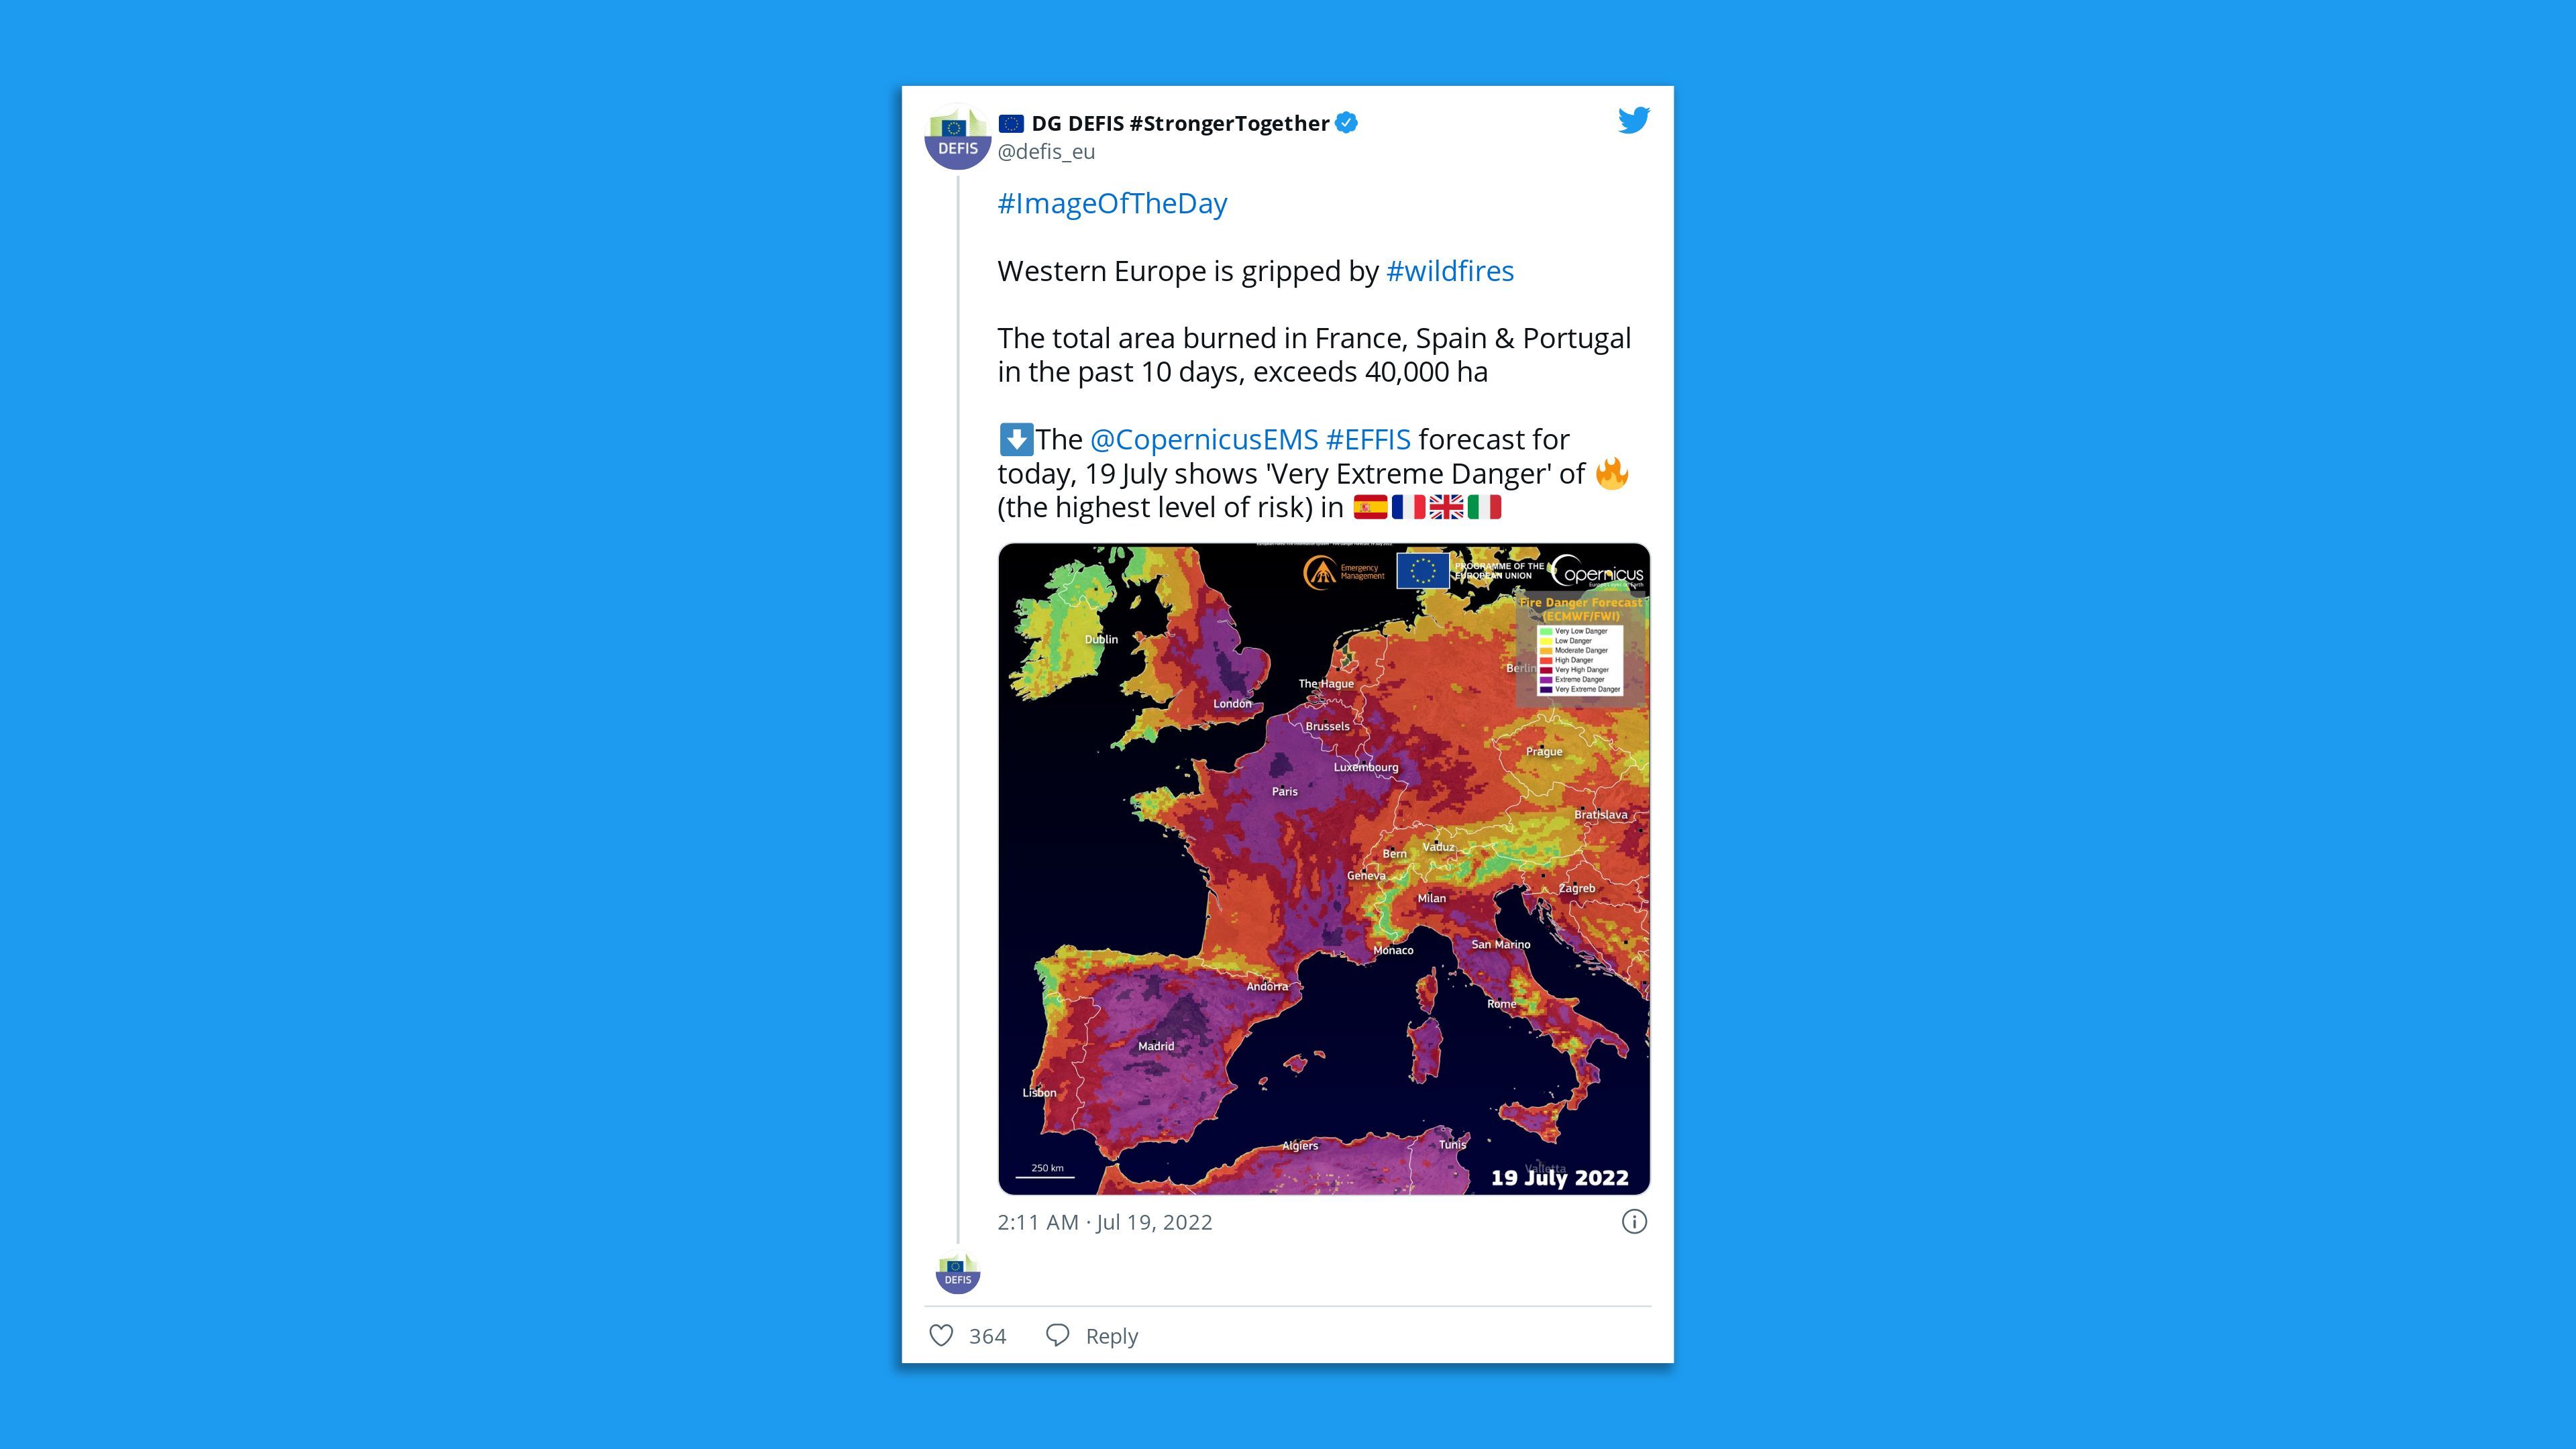 A screenshot of an EU tweet of a fire risk map with the comment " total area burned in France, Spain & Portugal in the past 10 days, exceeds 40,000 ha."